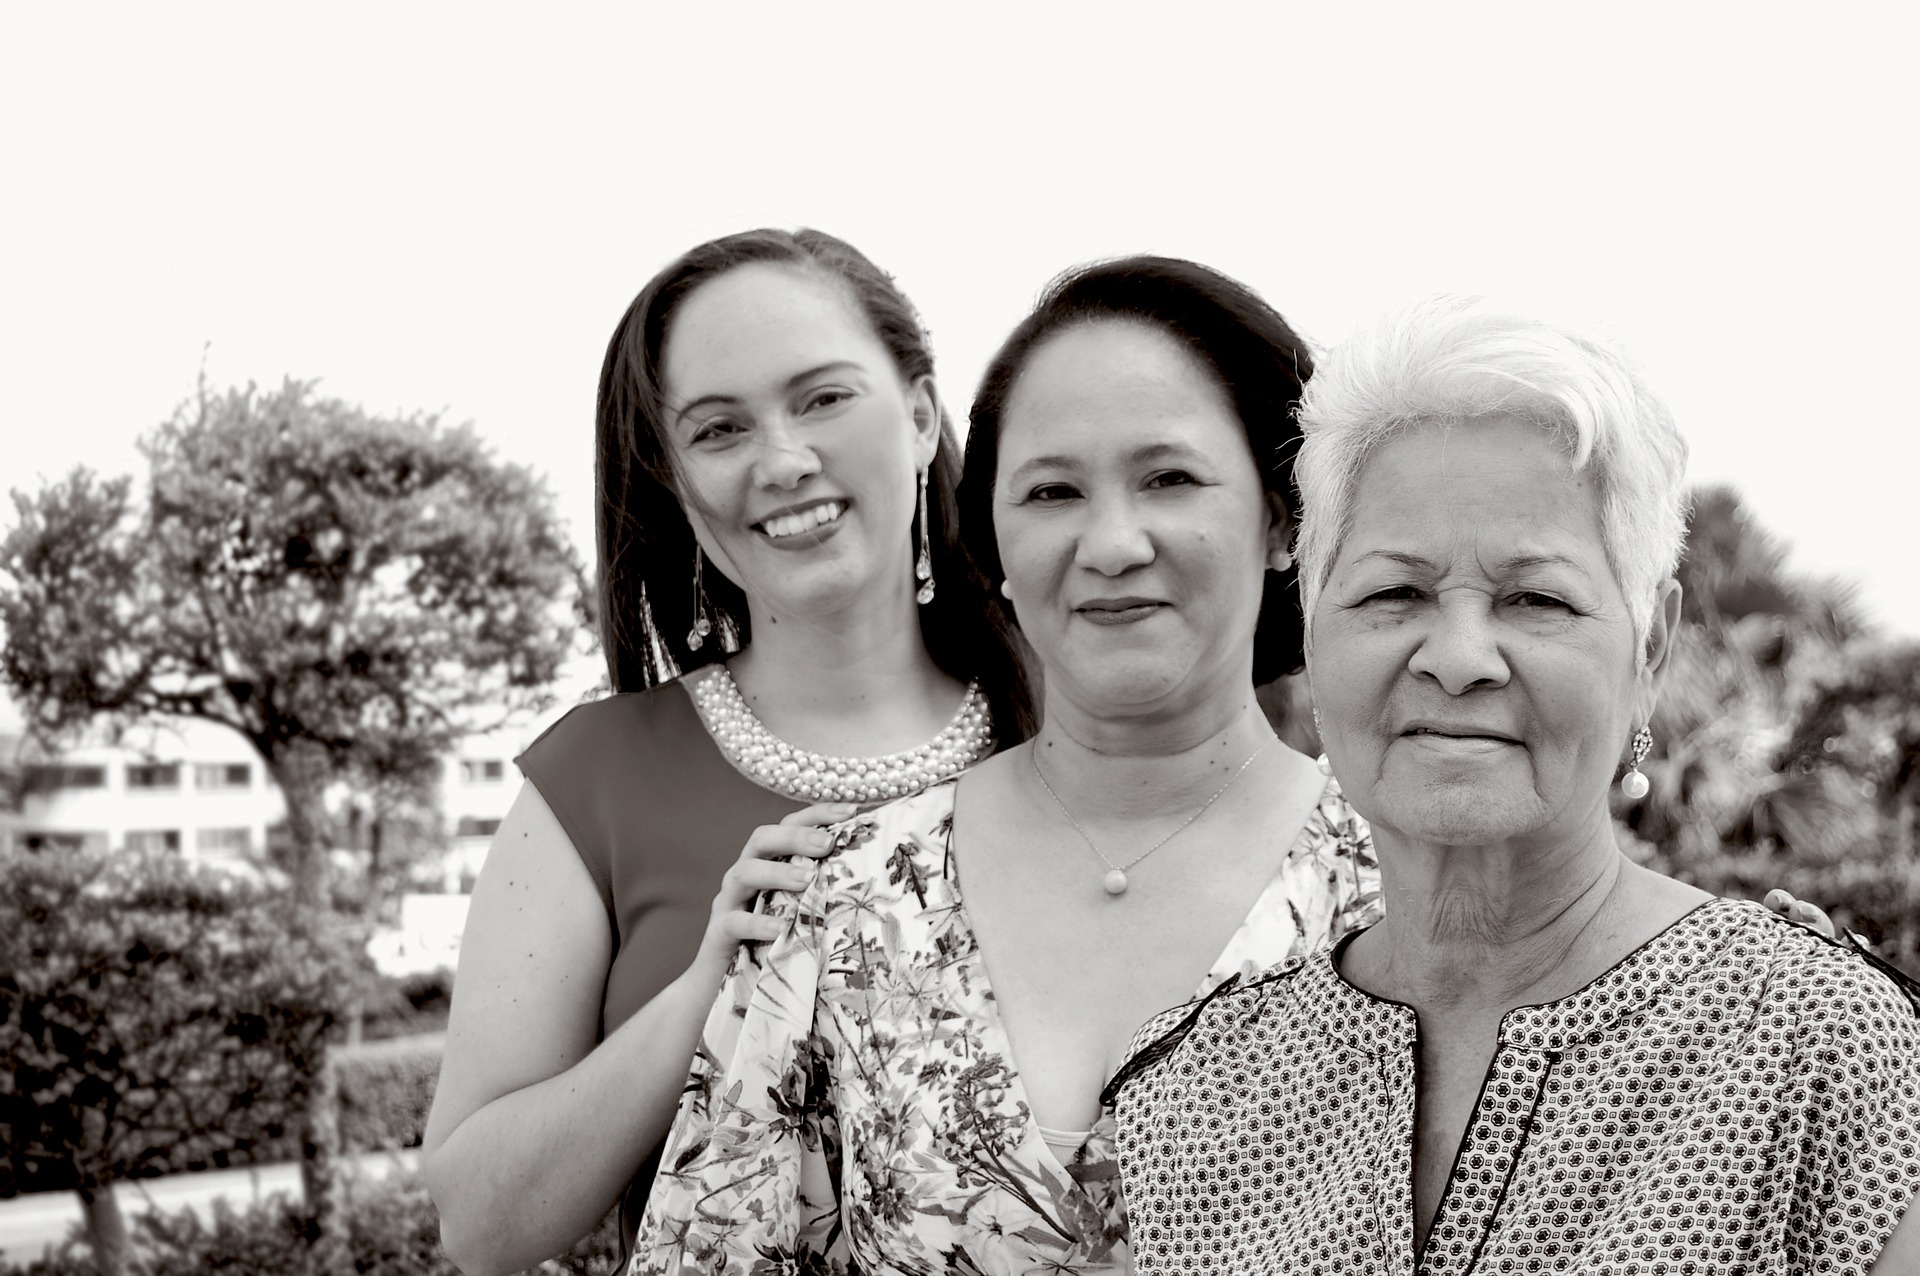 Three generations of women in a family: young adult, middle-aged mother, and older grandmother.